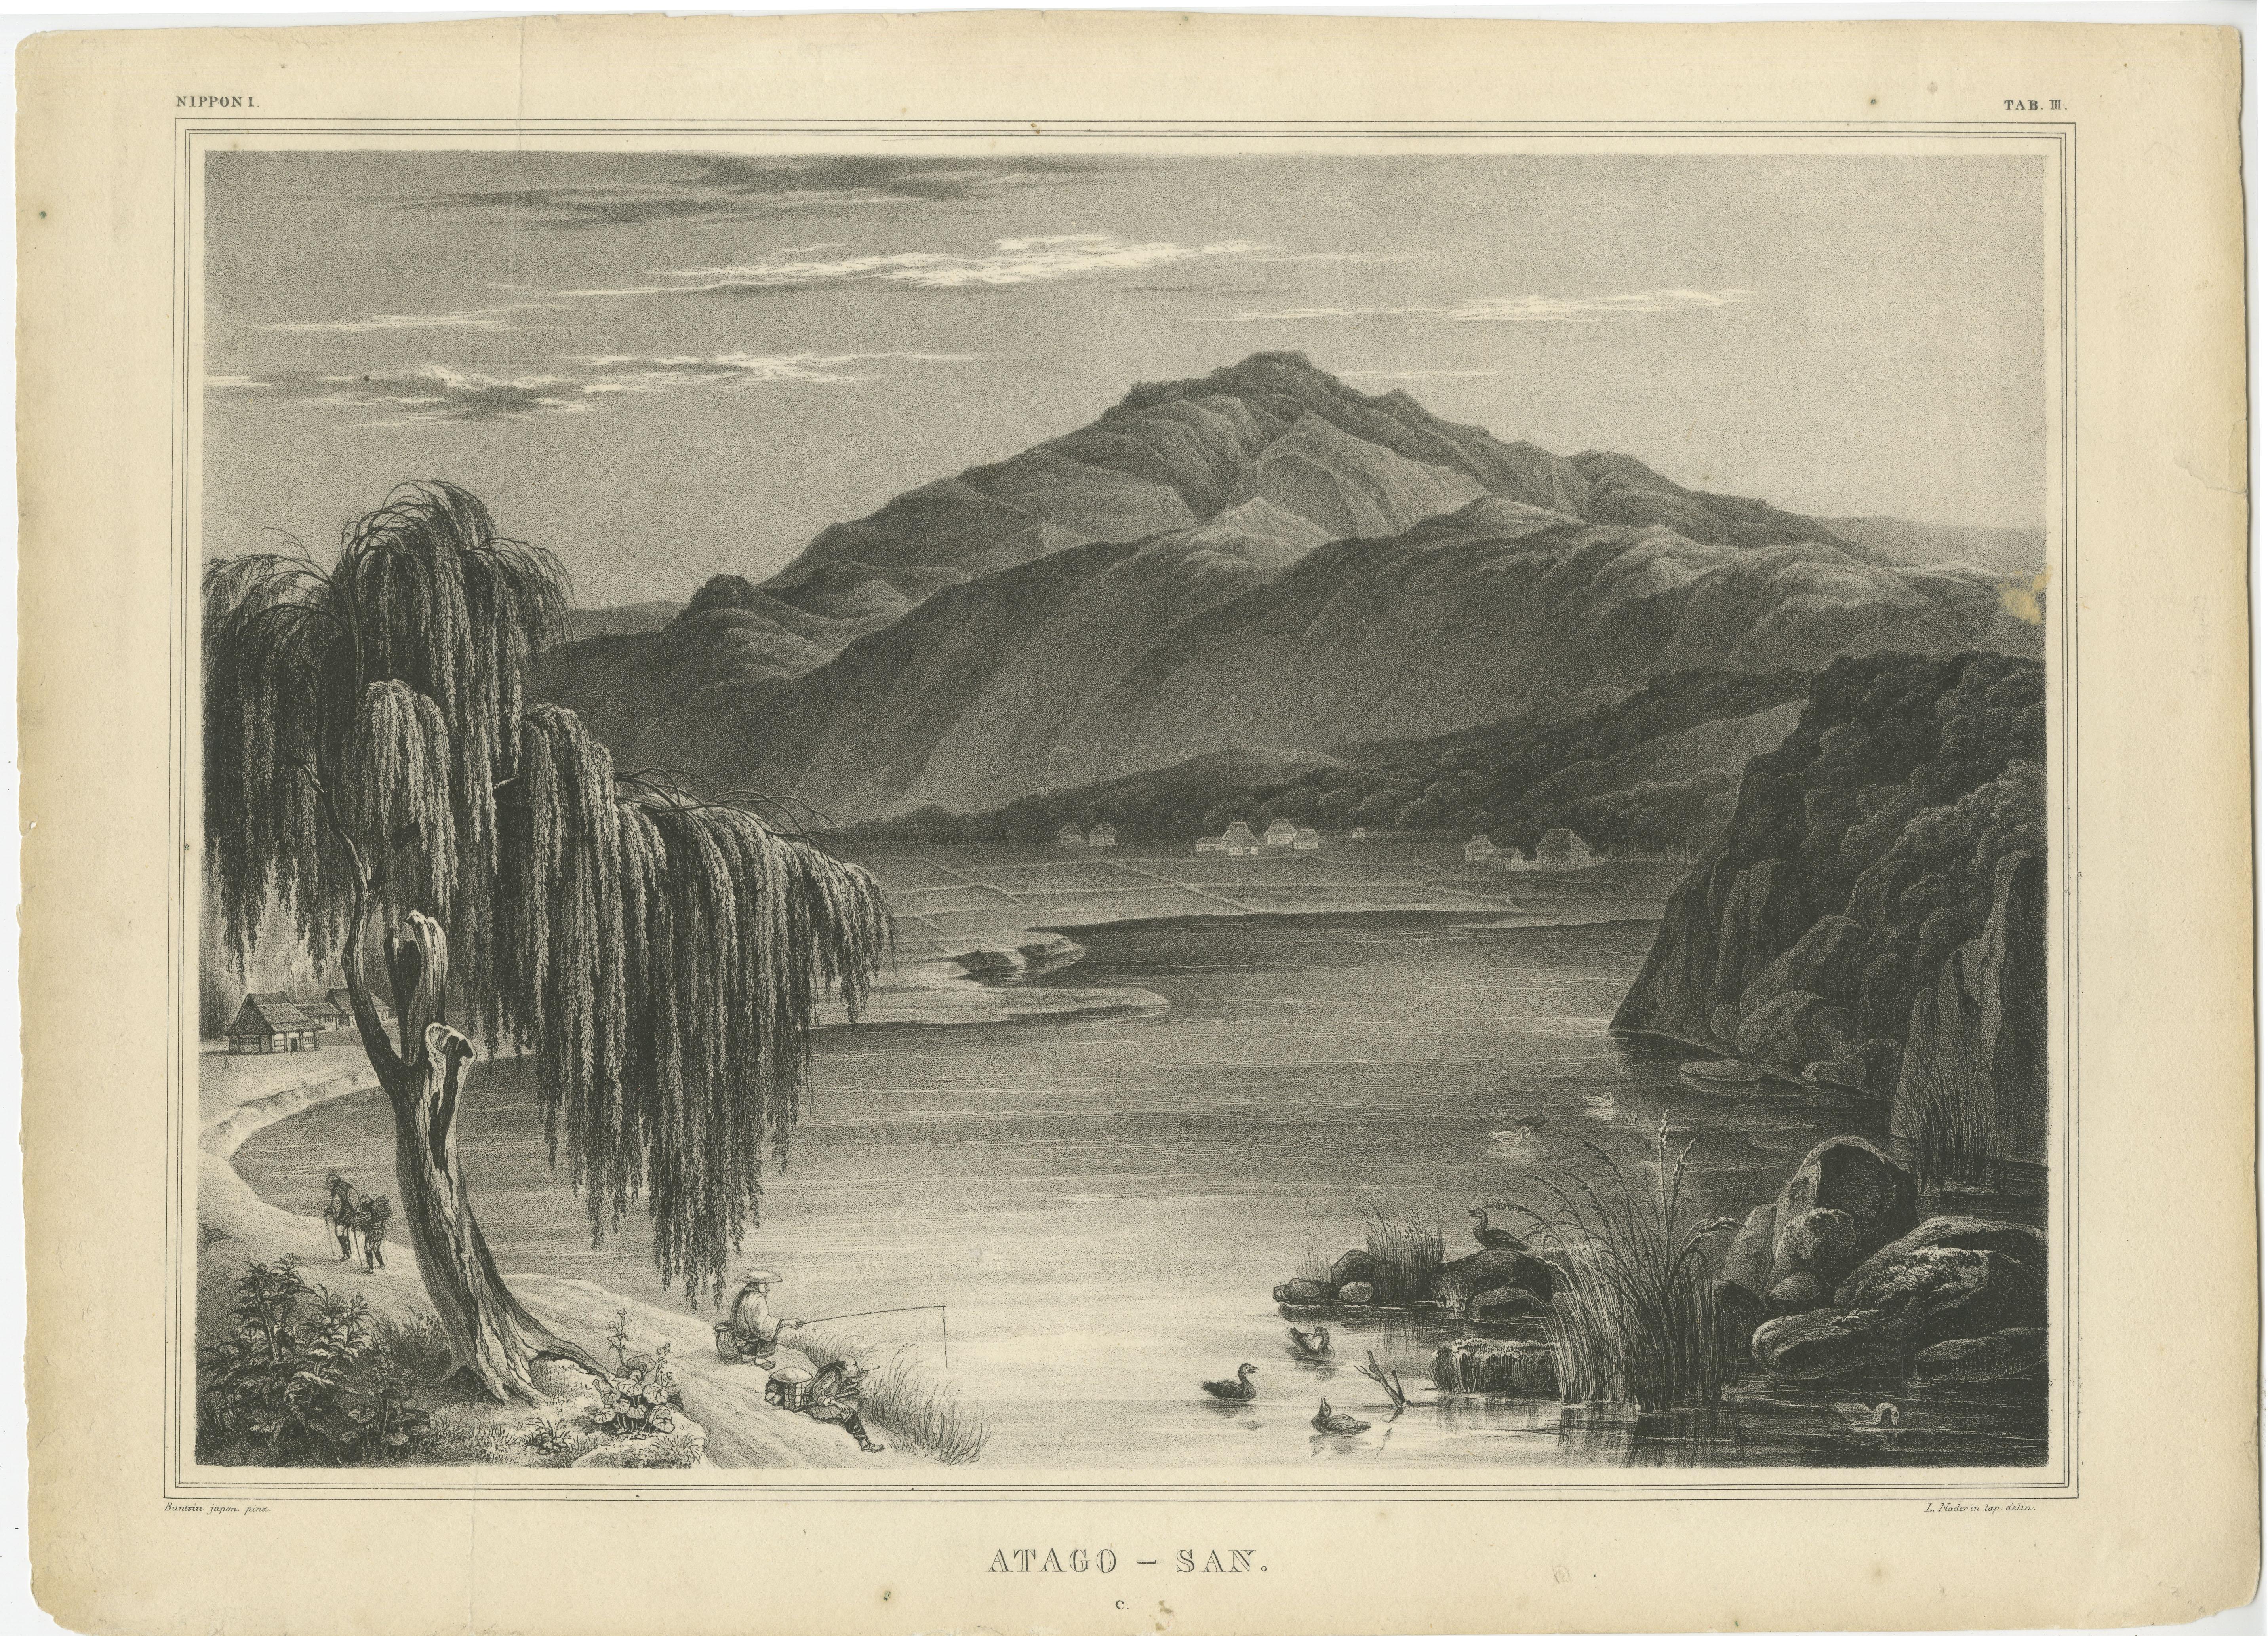 Vintage print titled 'Atago-San'. Original print with a view of Mount Atago. Mount Atago is a 924m mountain in the northwestern part of Ukyo-ku, in the city of Kyoto, Kyoto Prefecture, Japan. The Atago Shrine is located on the top of the